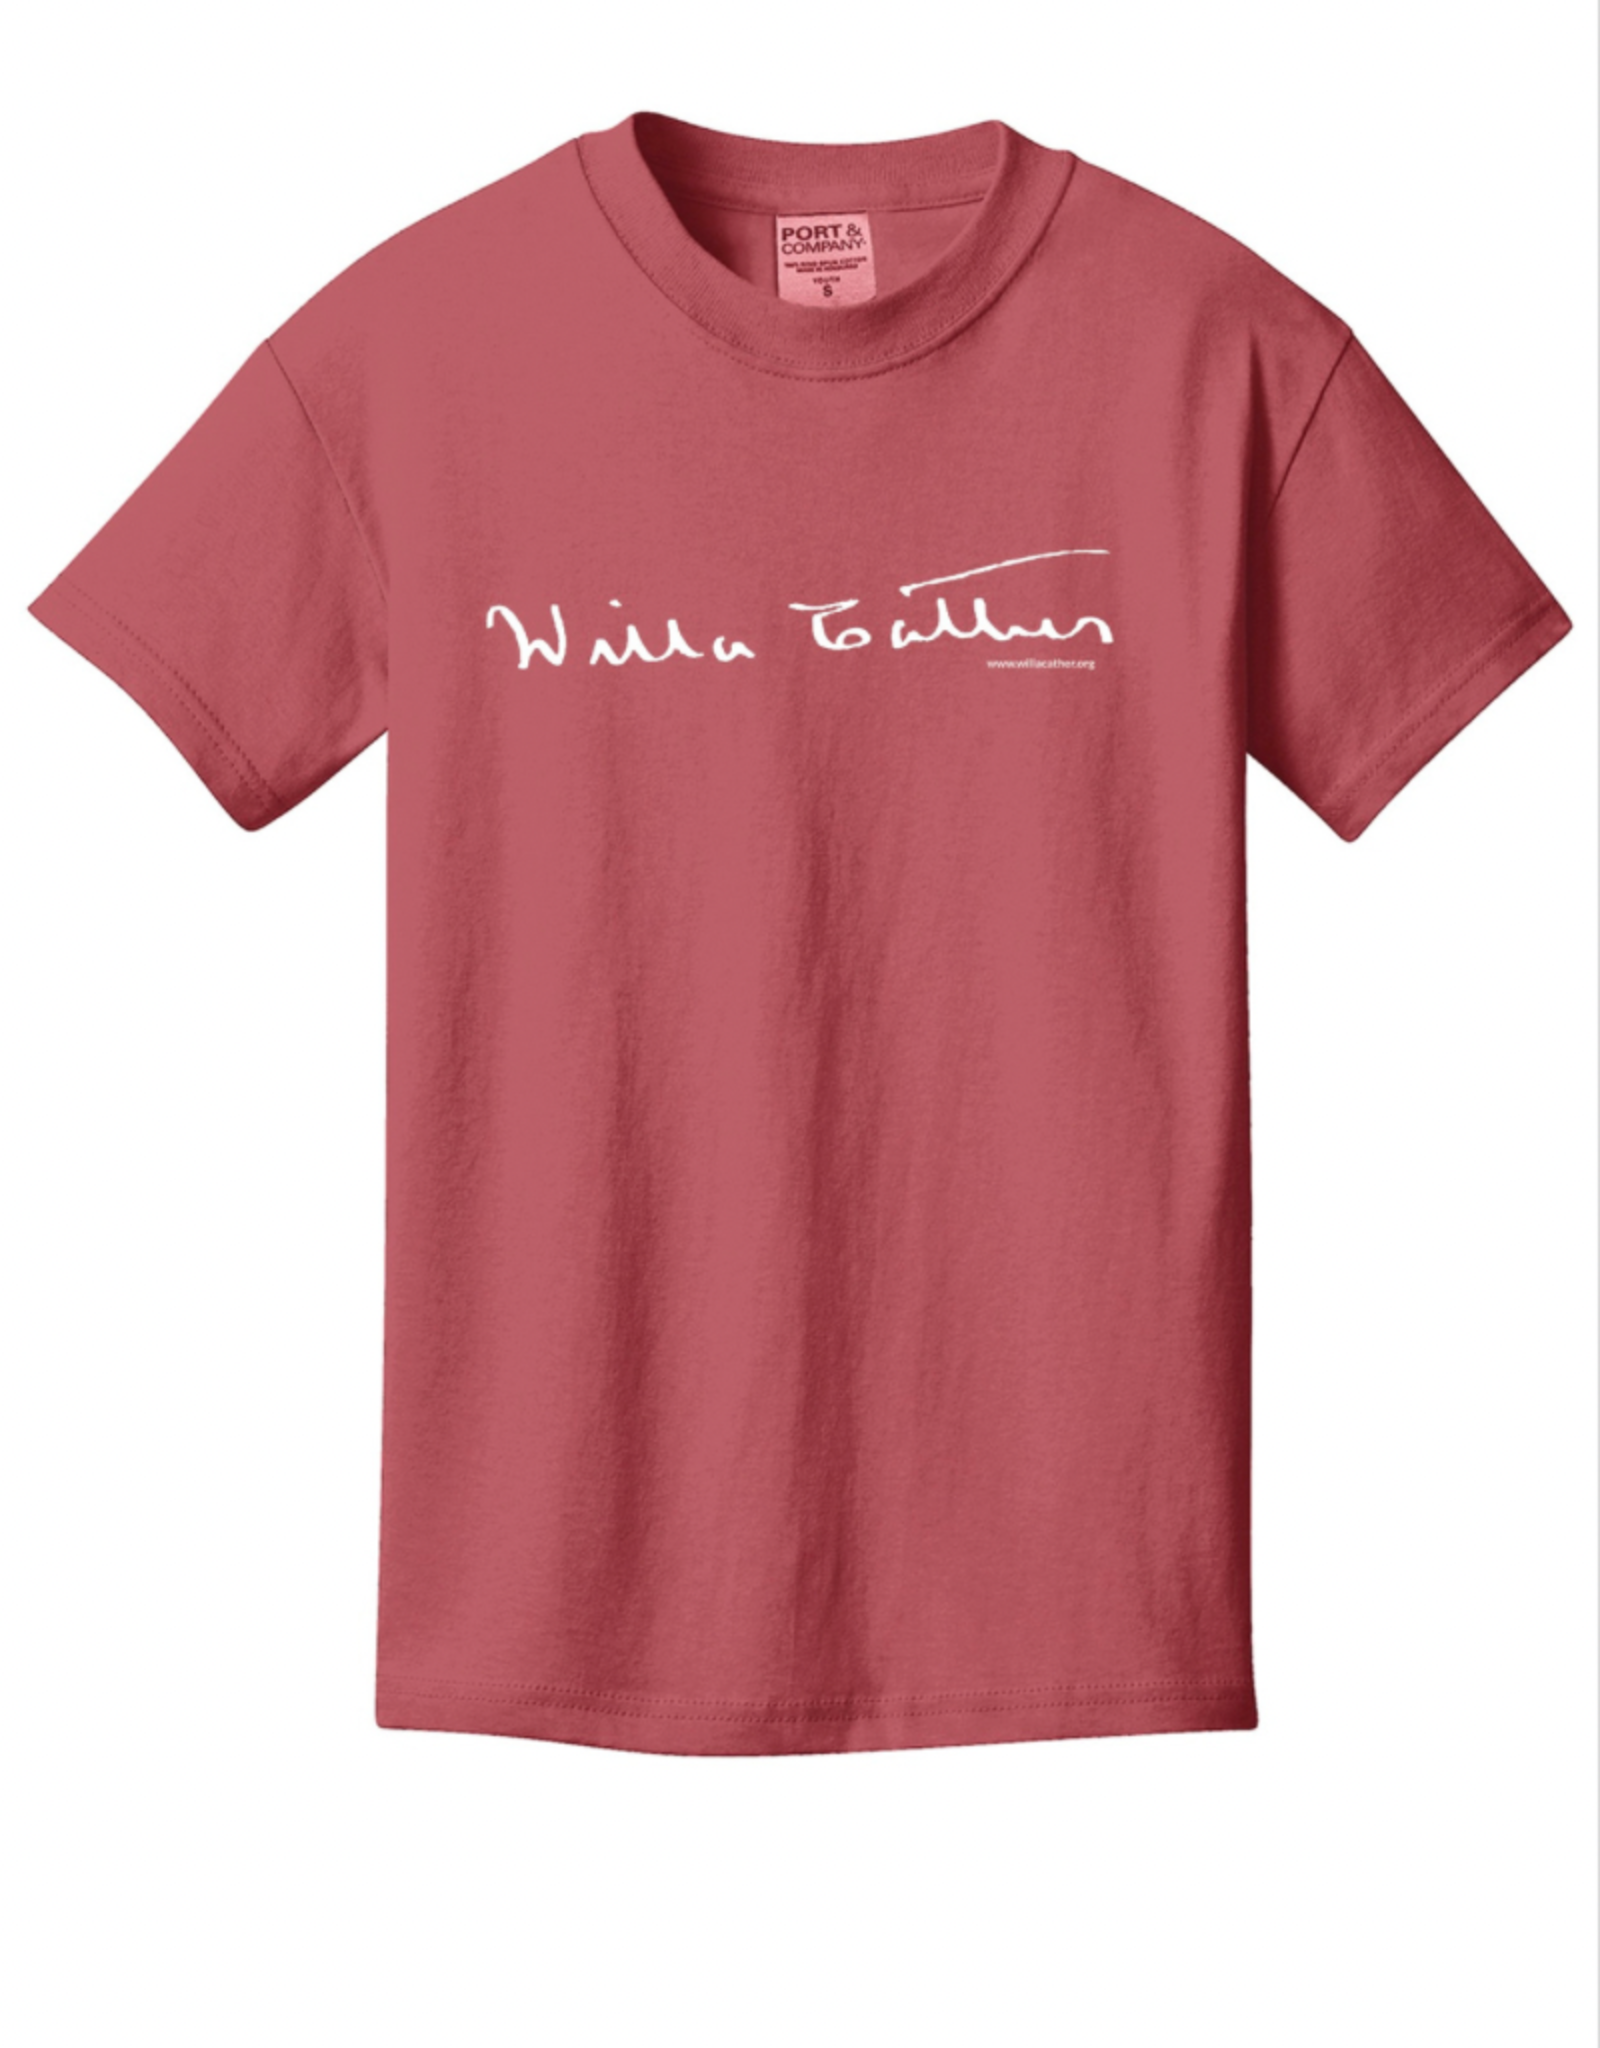 Willa Cather Signature Youth T-Shirt